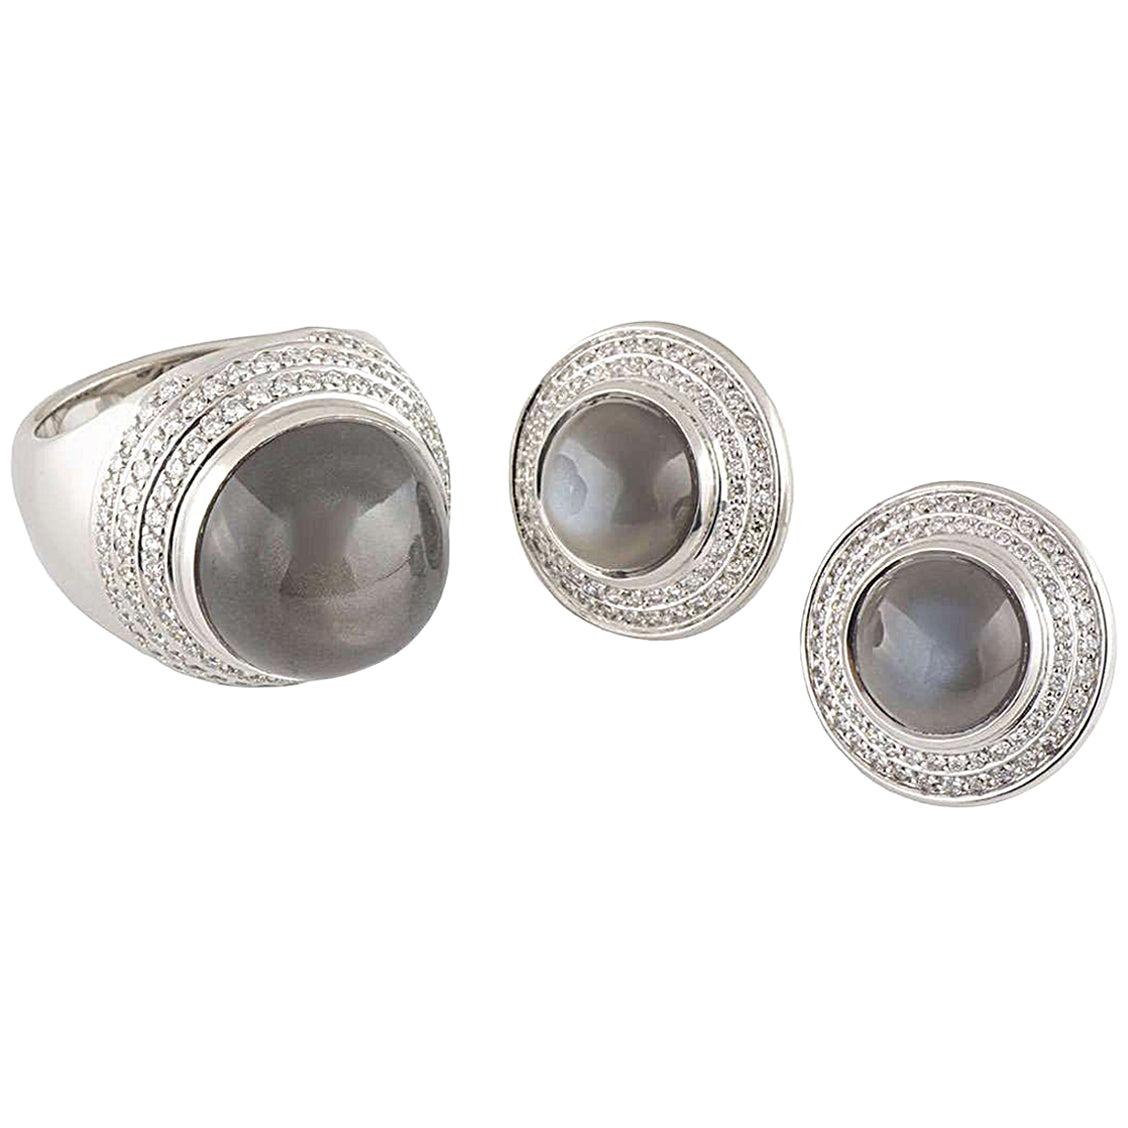 Theo Fennell Diamond and Quartz Ring and Earrings Suite